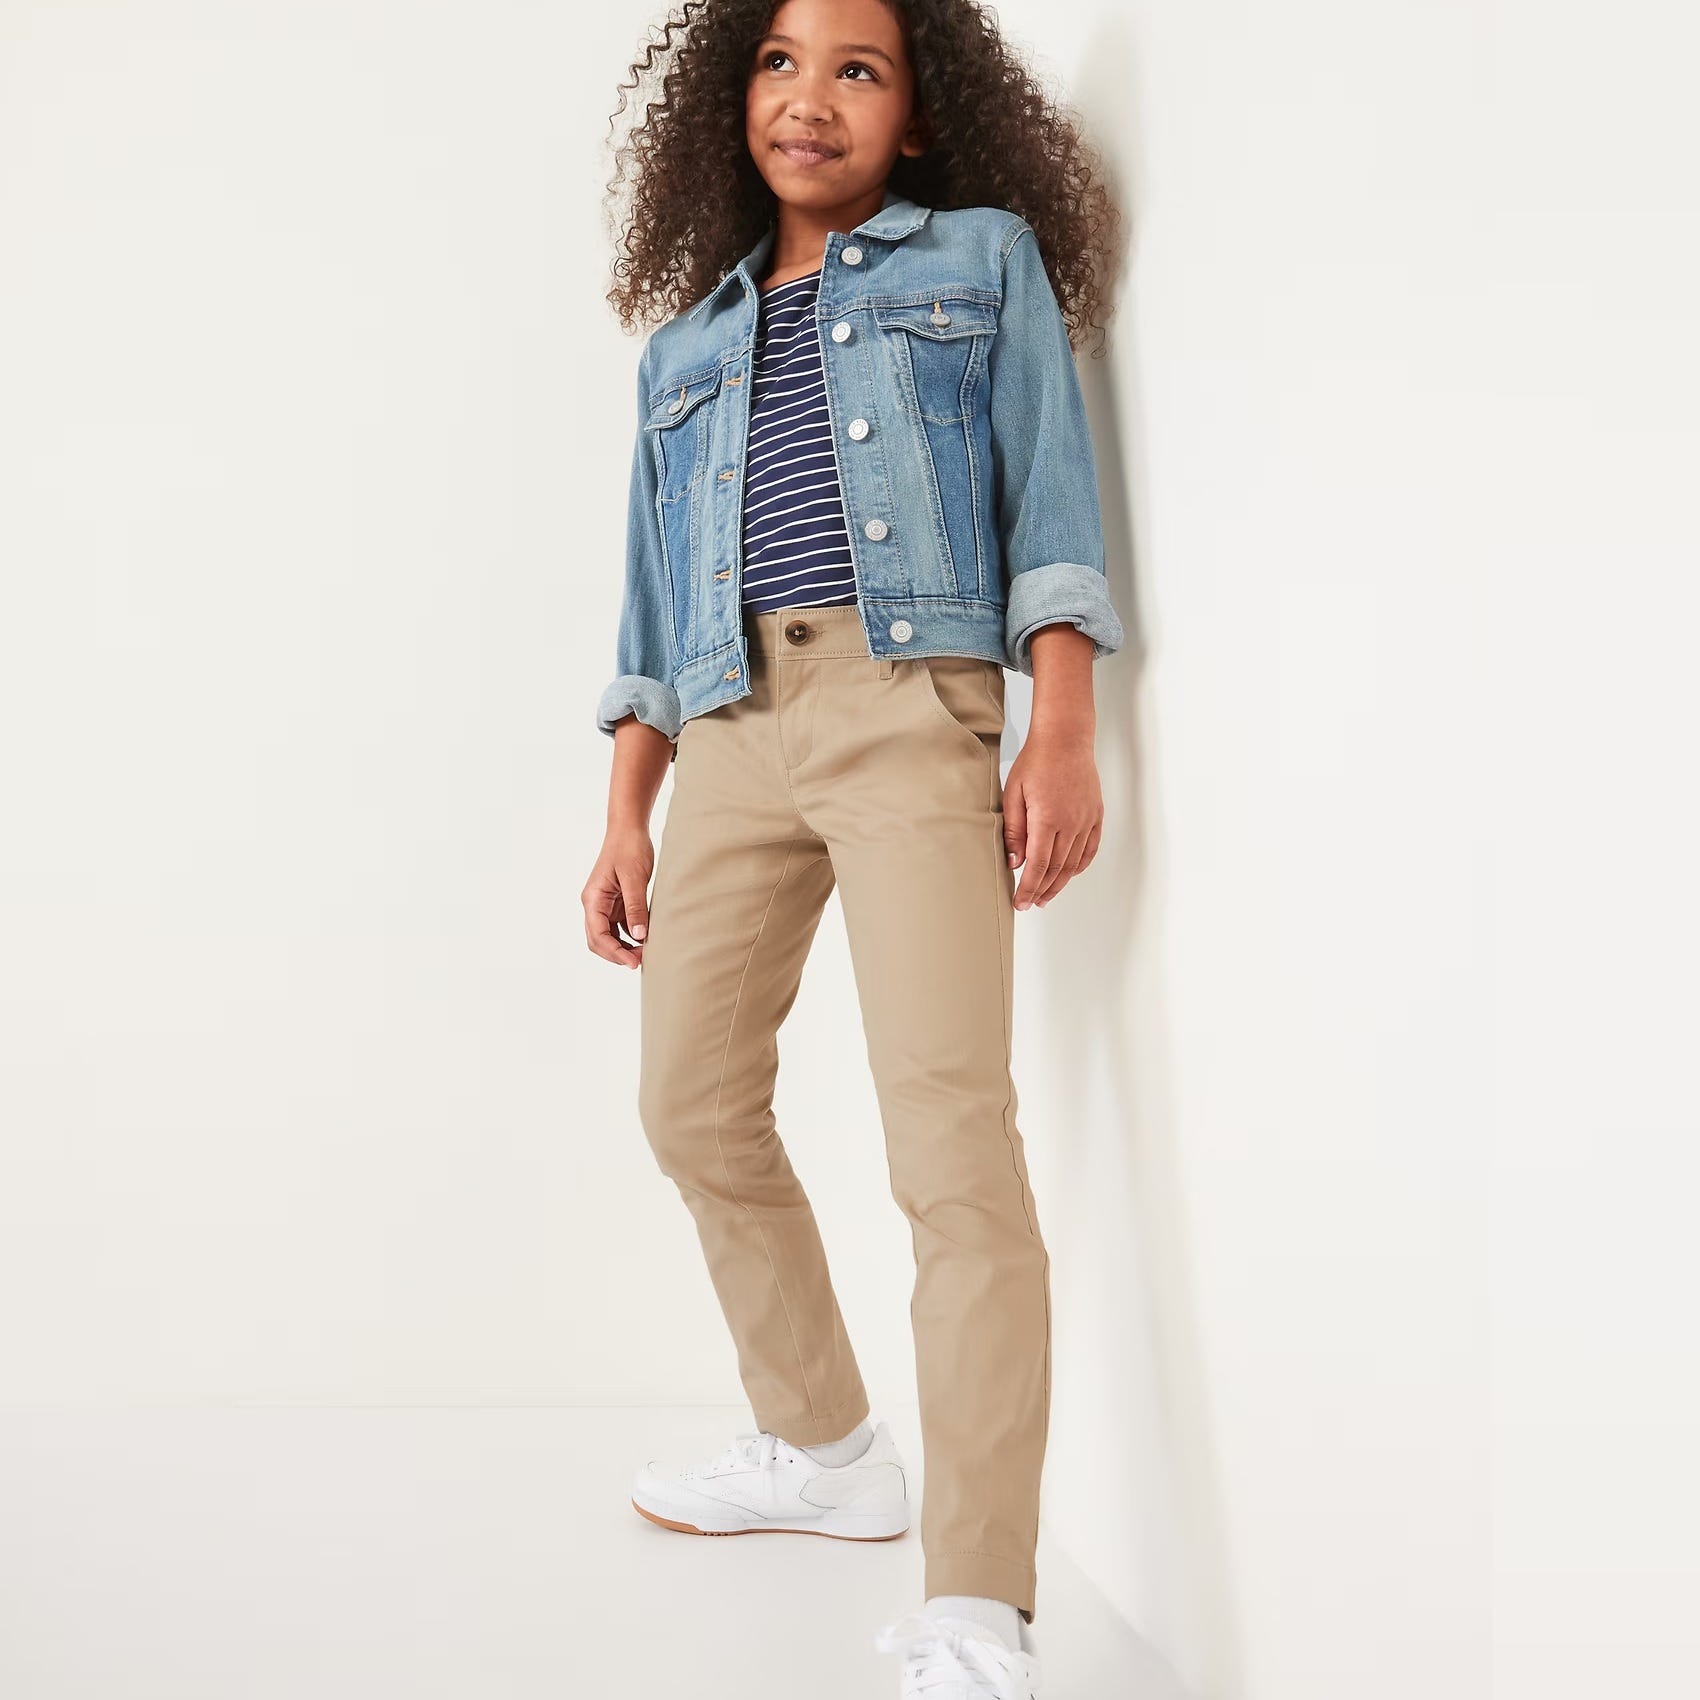 A young girl models a denim jacket, striped top, khaki pants, and white sneakers.